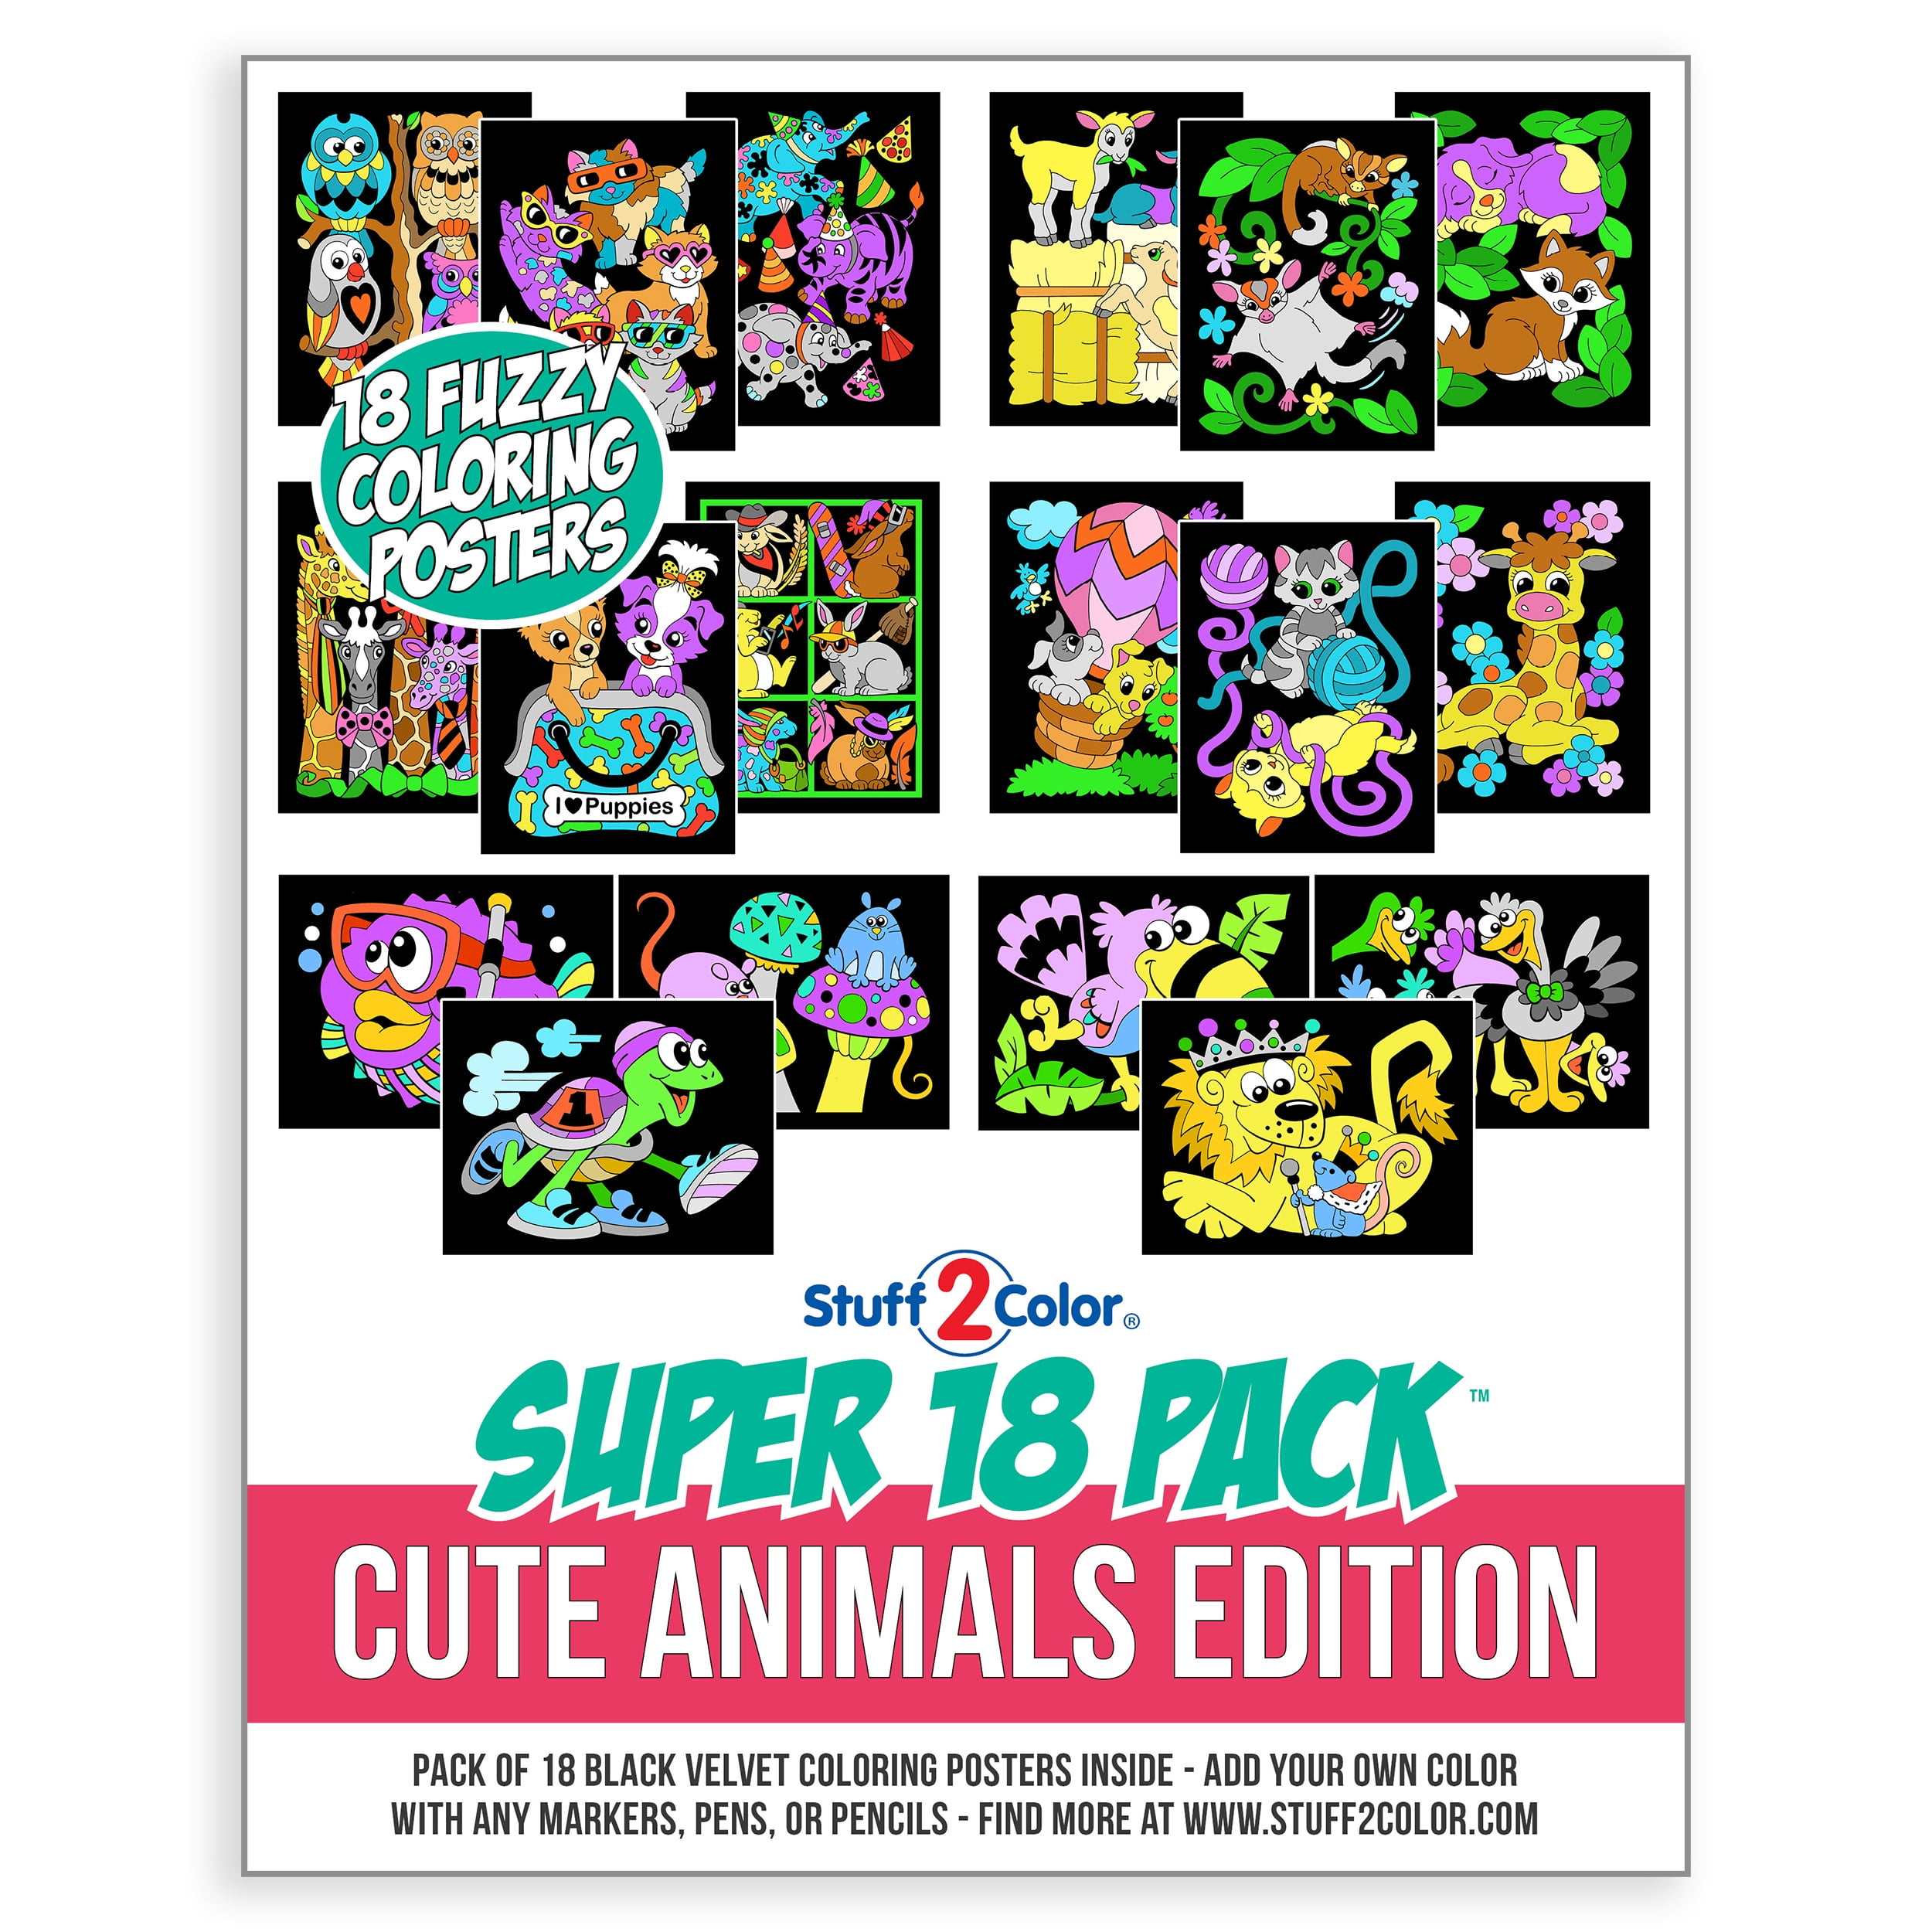 Super 18 Pack of Fuzzy Velvet Coloring Posters (Cute Animals